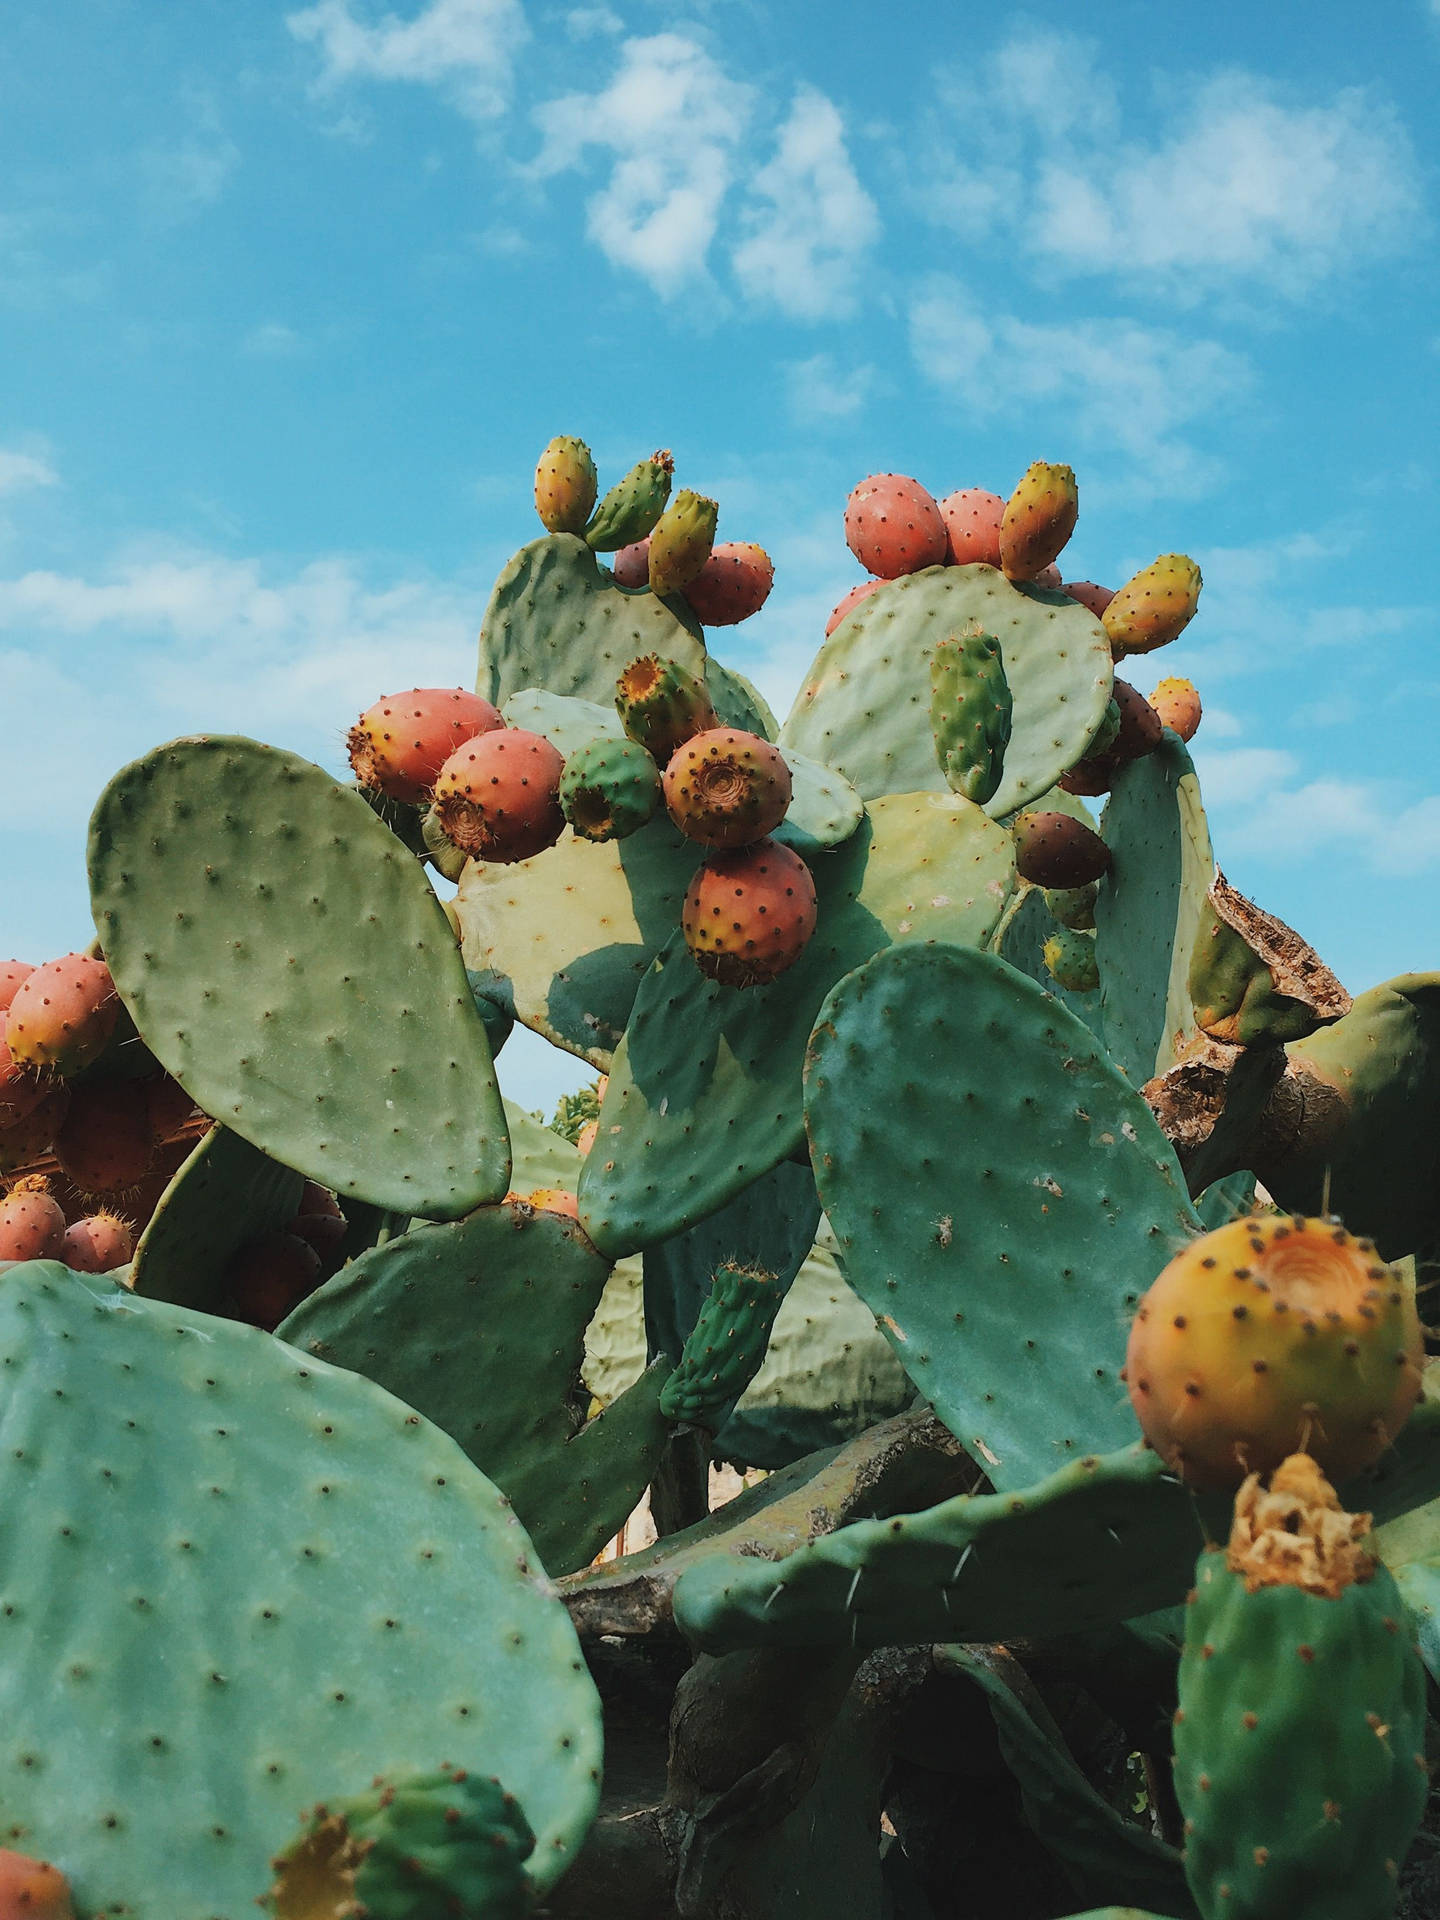 Prickly Pear Background Wallpaper